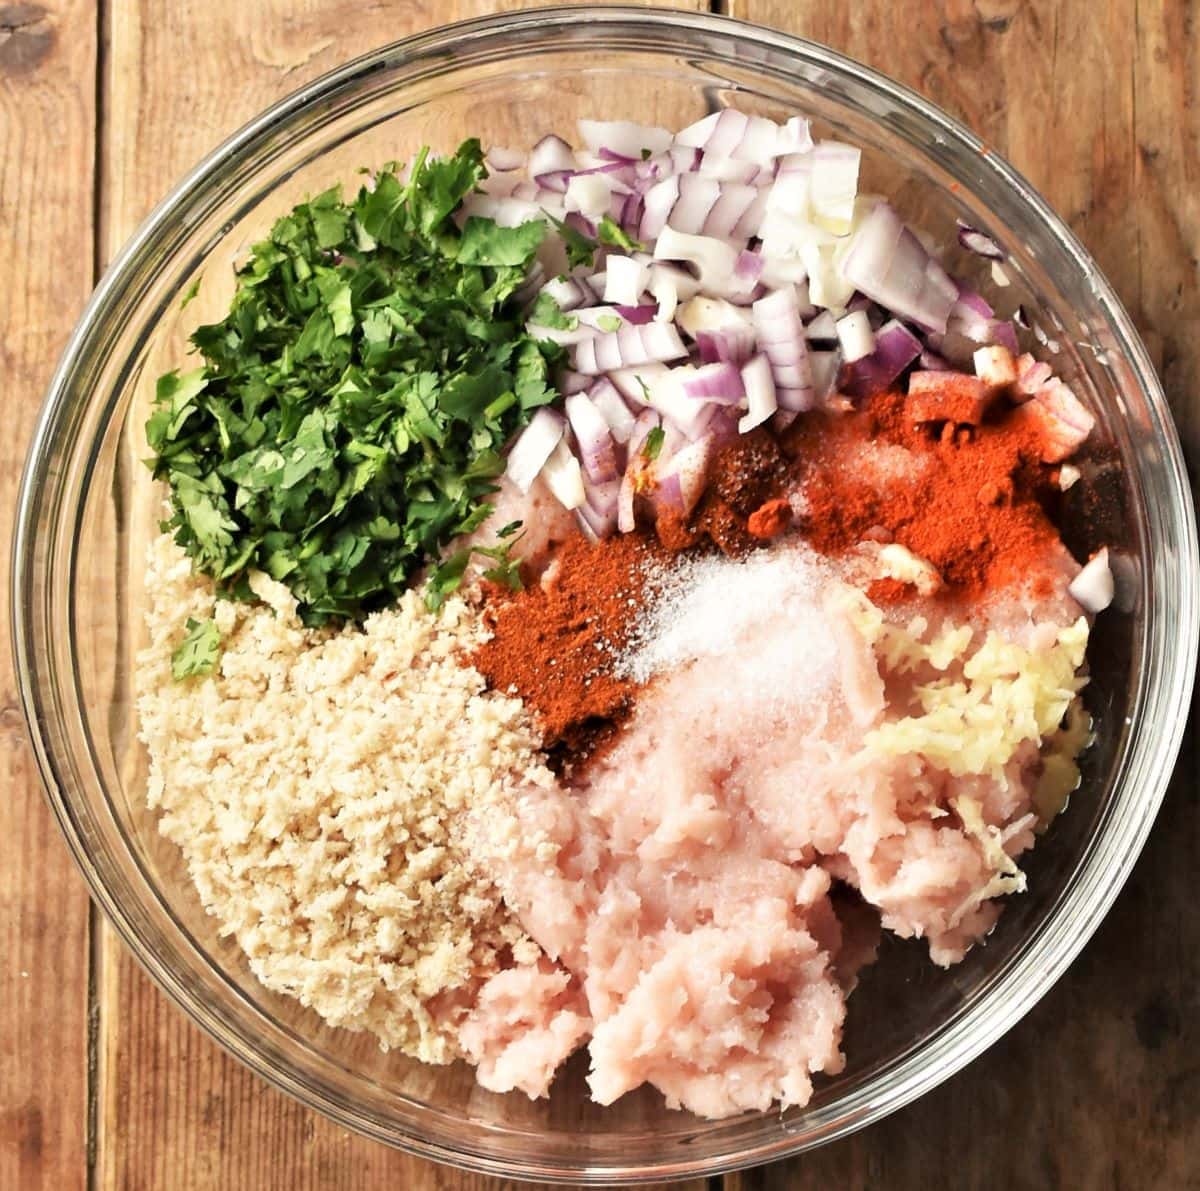 Spicy chicken burgers ingredients in mixing bowl.